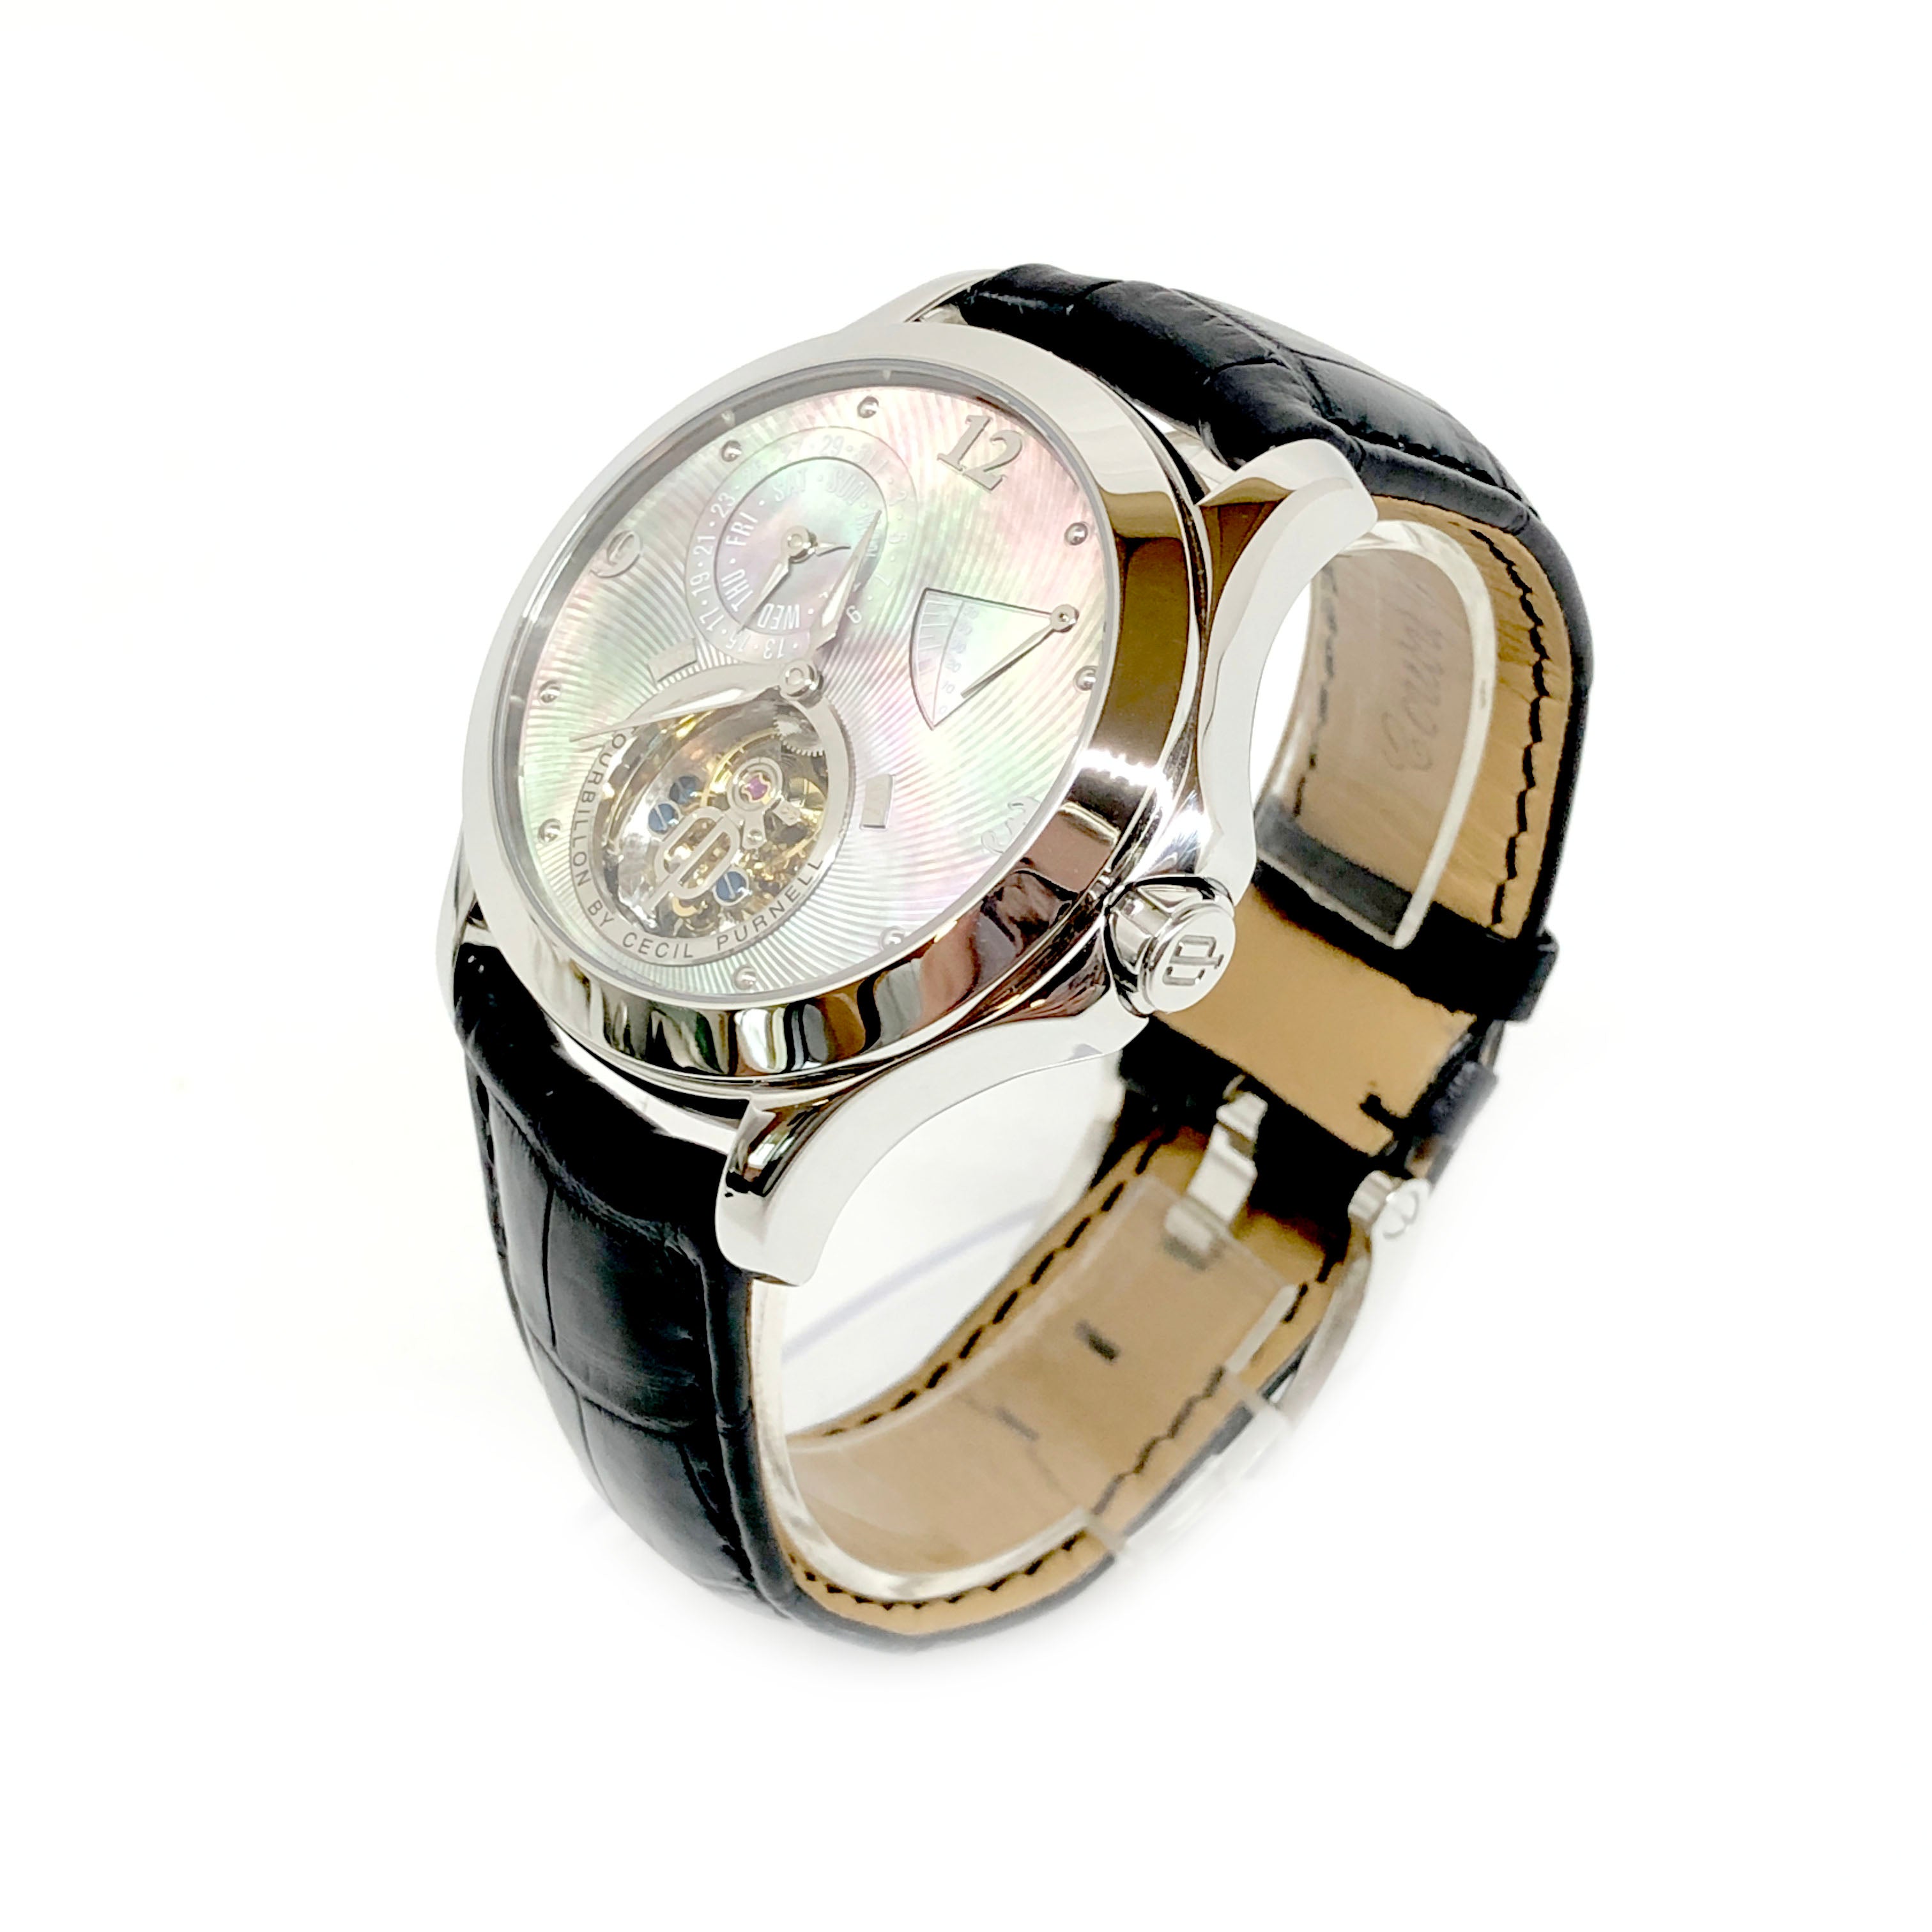 Cecil Purnell Tourbillon Stainless Steel Watch Limited Edition